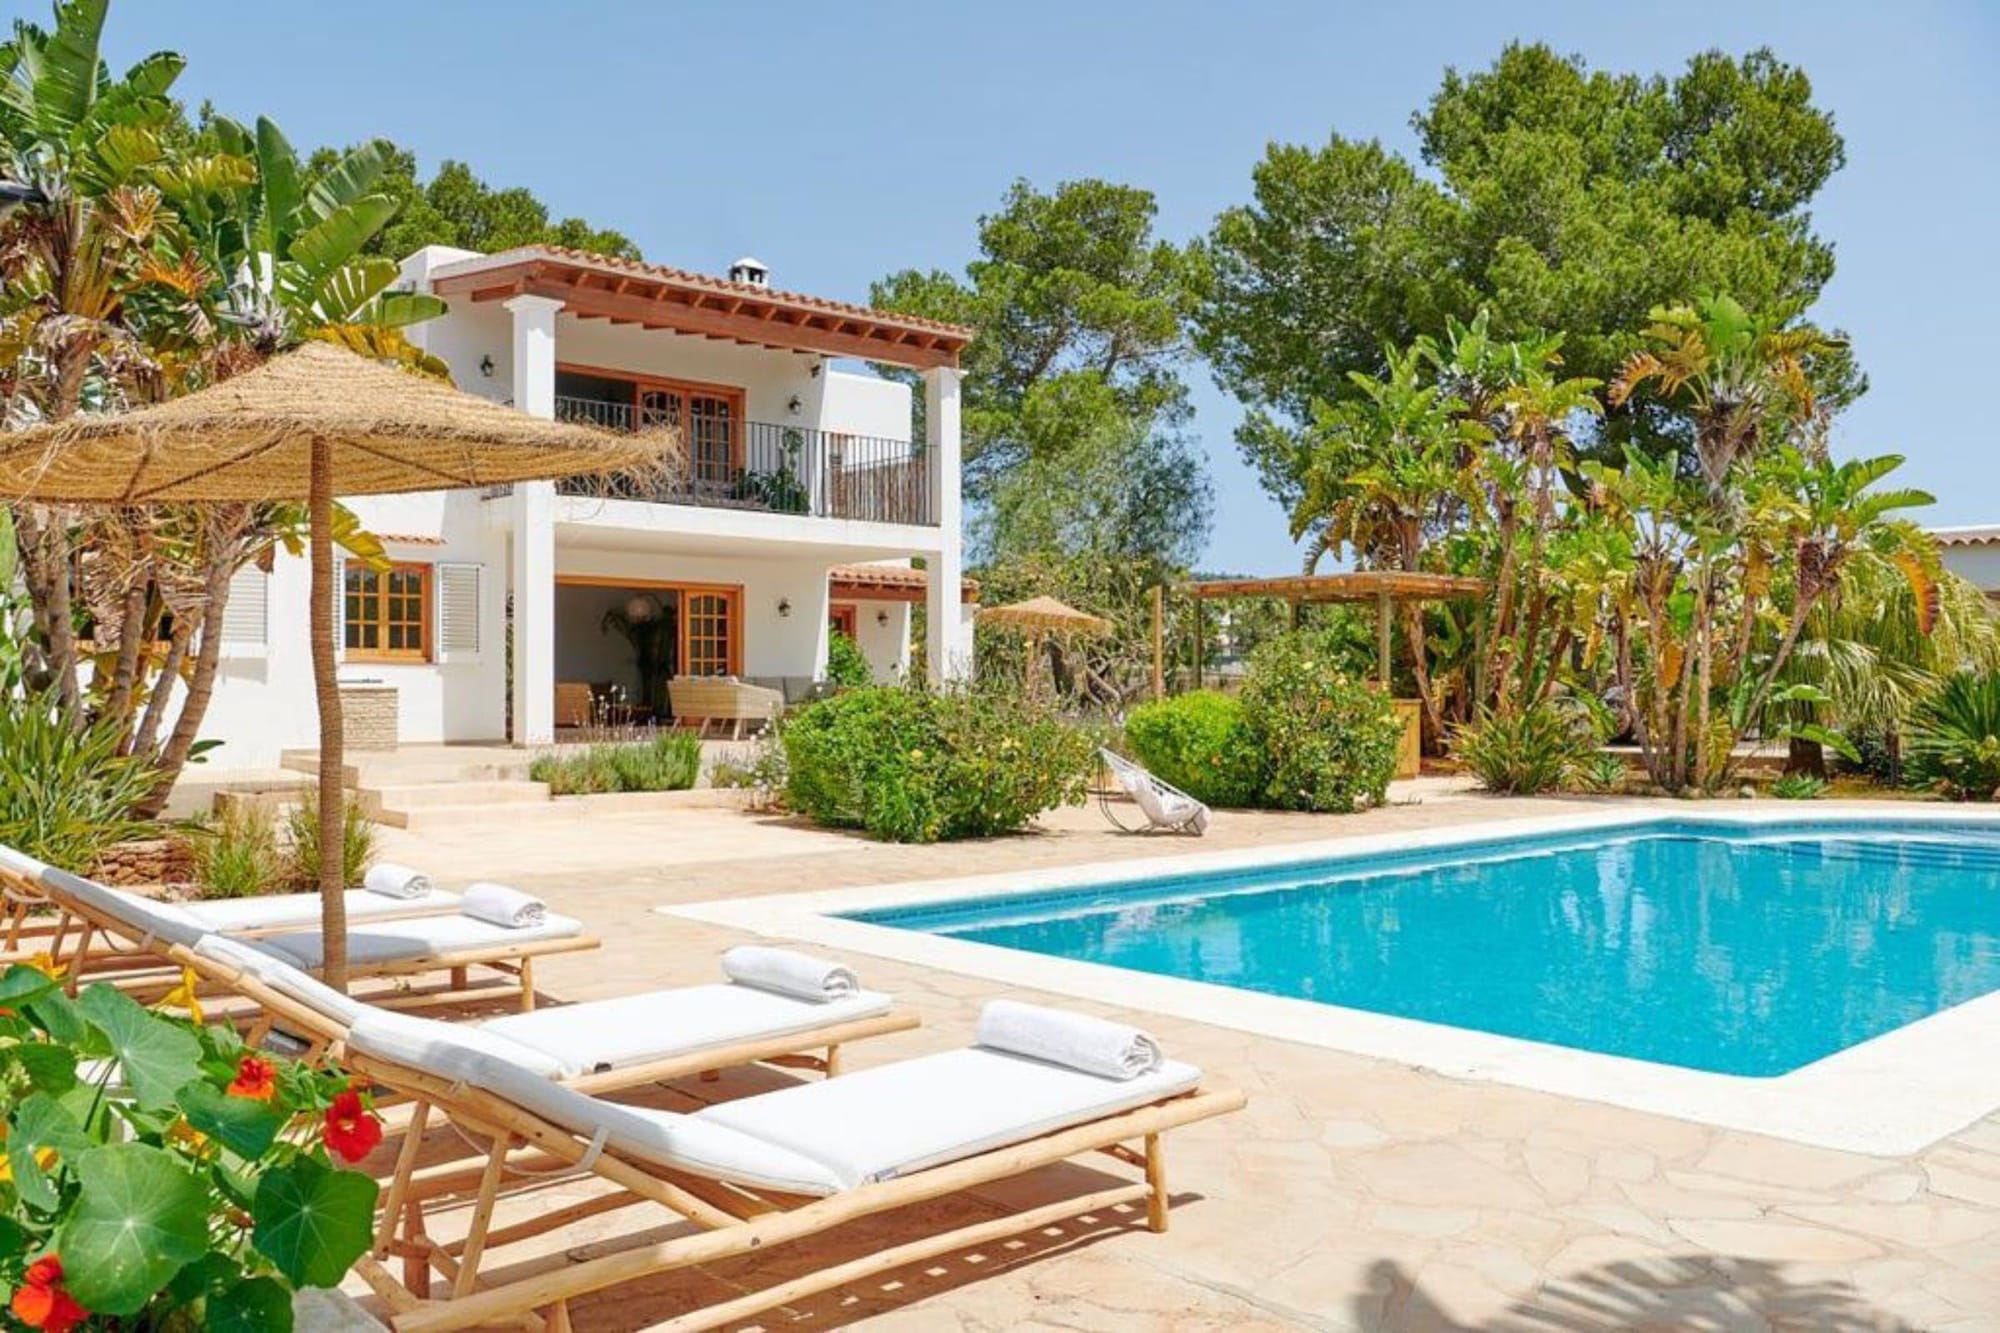 Kindred Member Home for Swap in the Balearic Islands